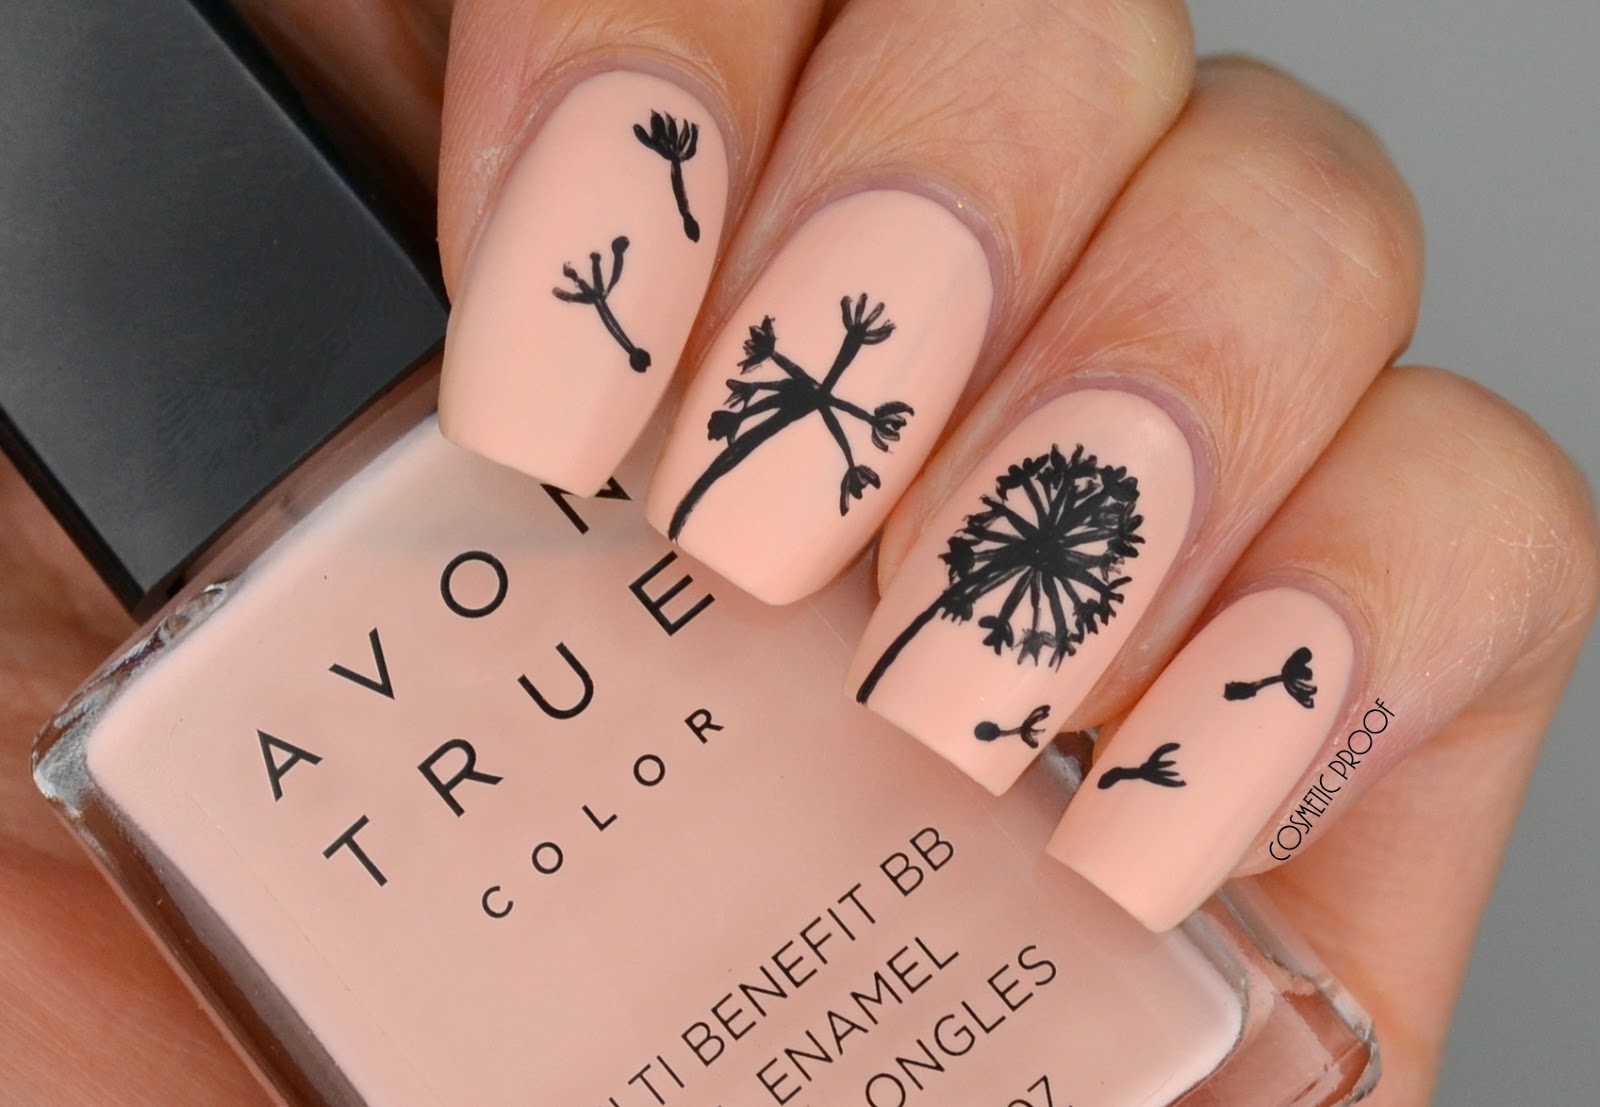 6. Dandelion Gel Nail Design with Stamping - wide 10